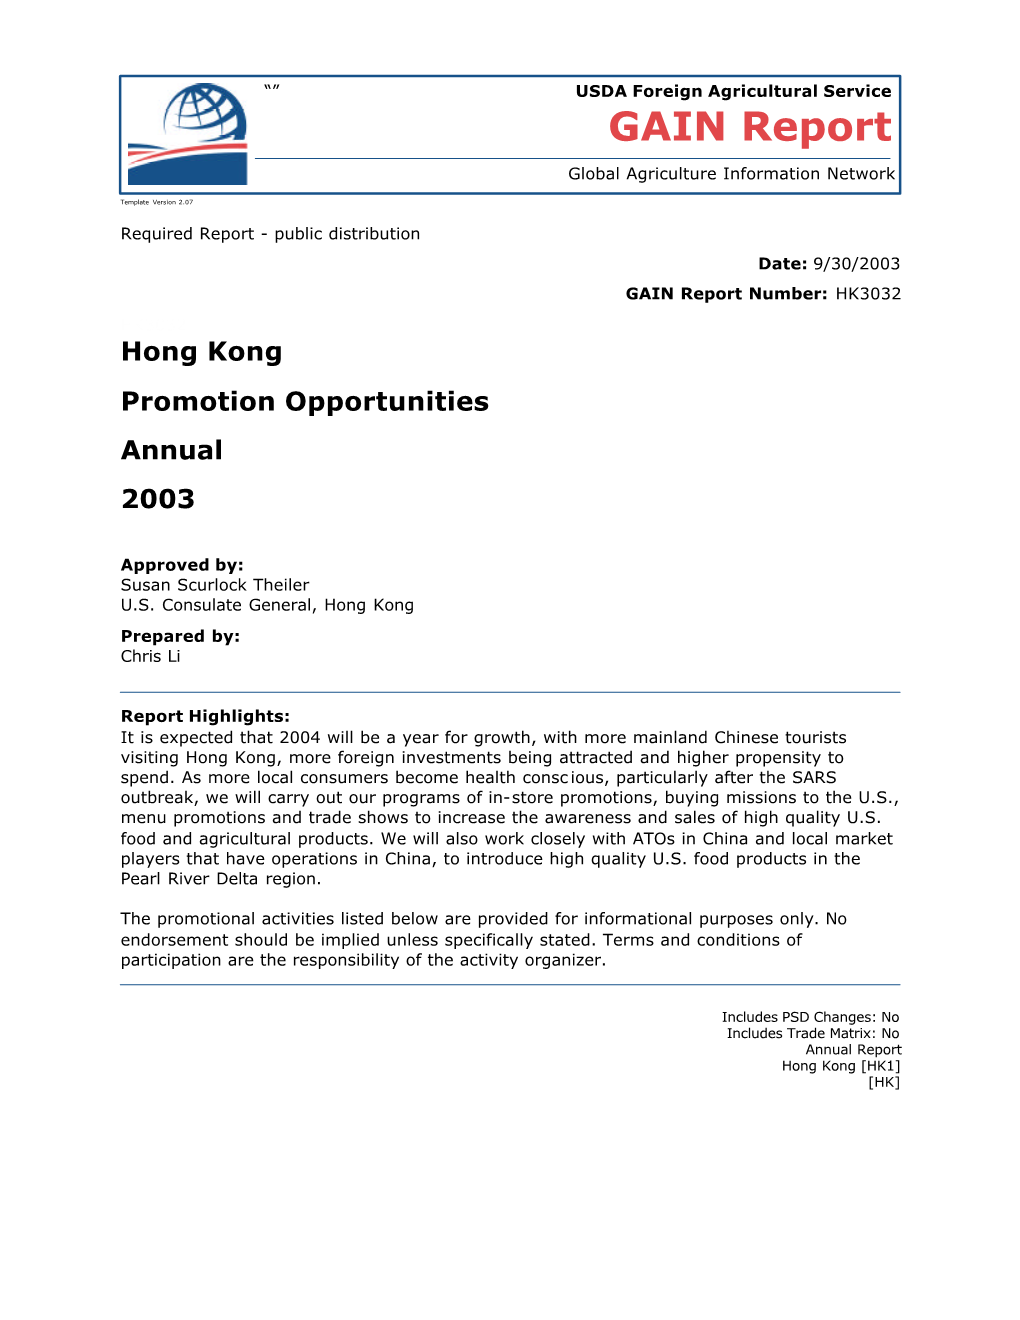 Hong Kong Promotion Opportunities Annual 2003